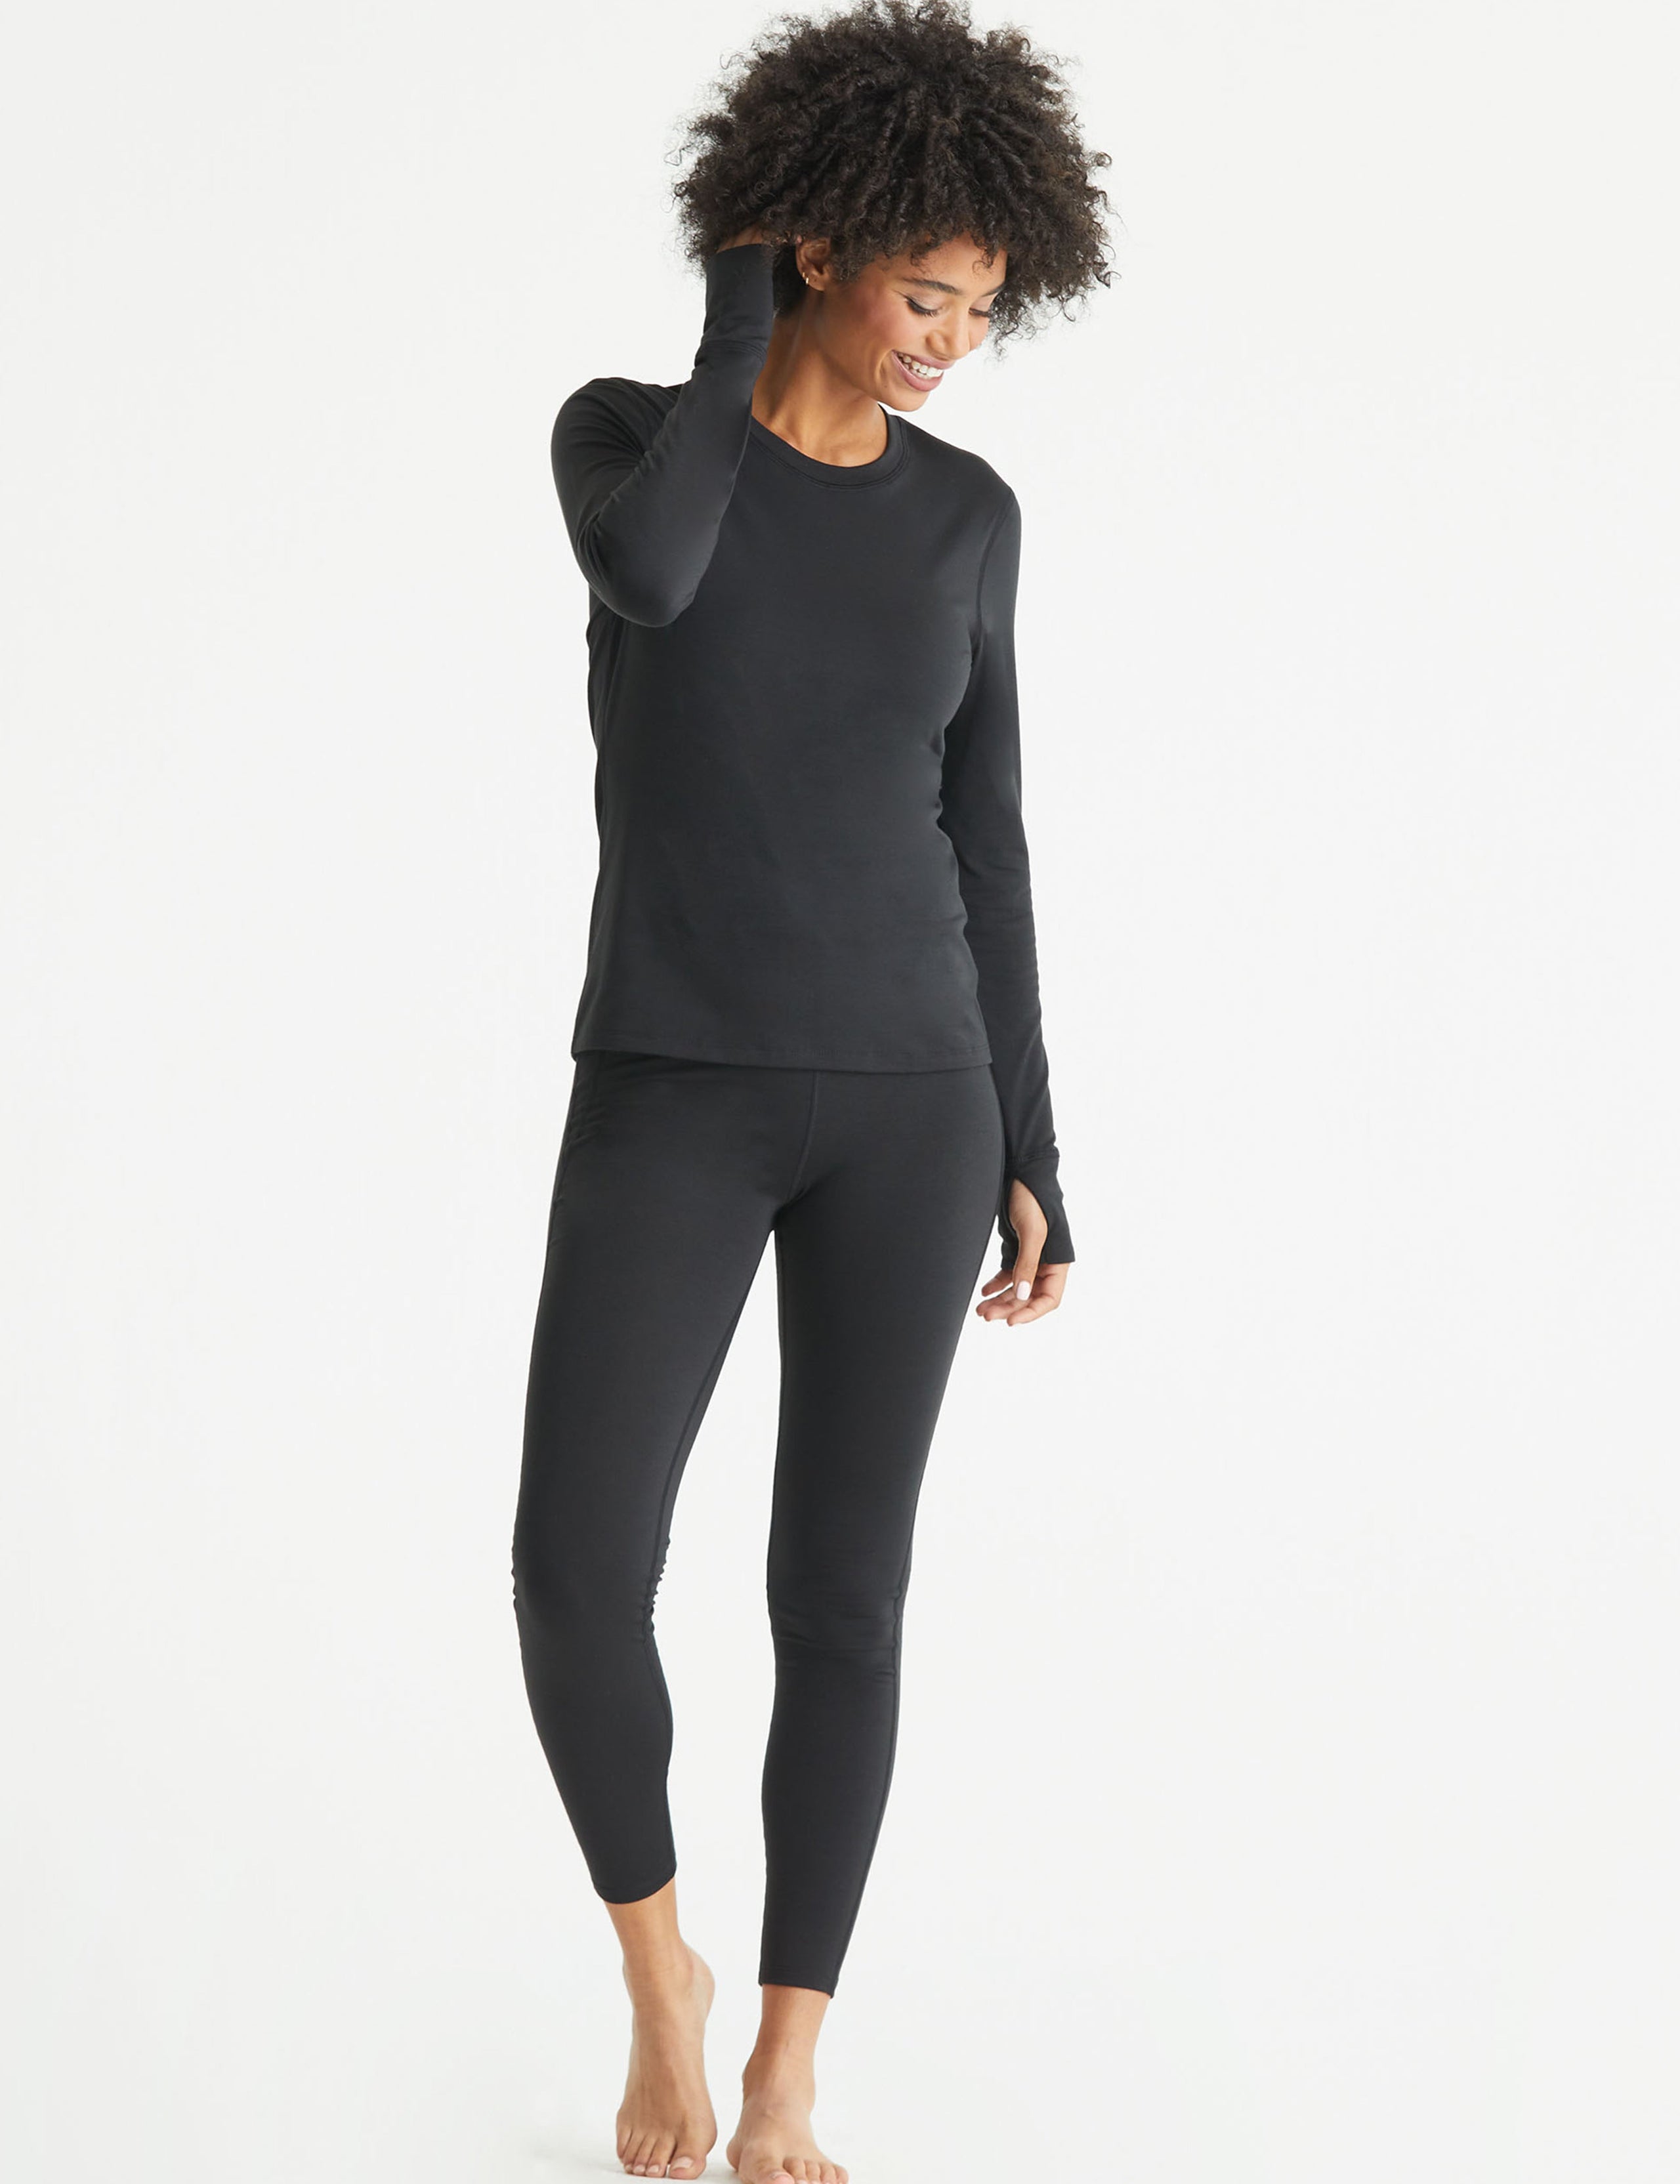 base layer shirt for women from Aether Apparel